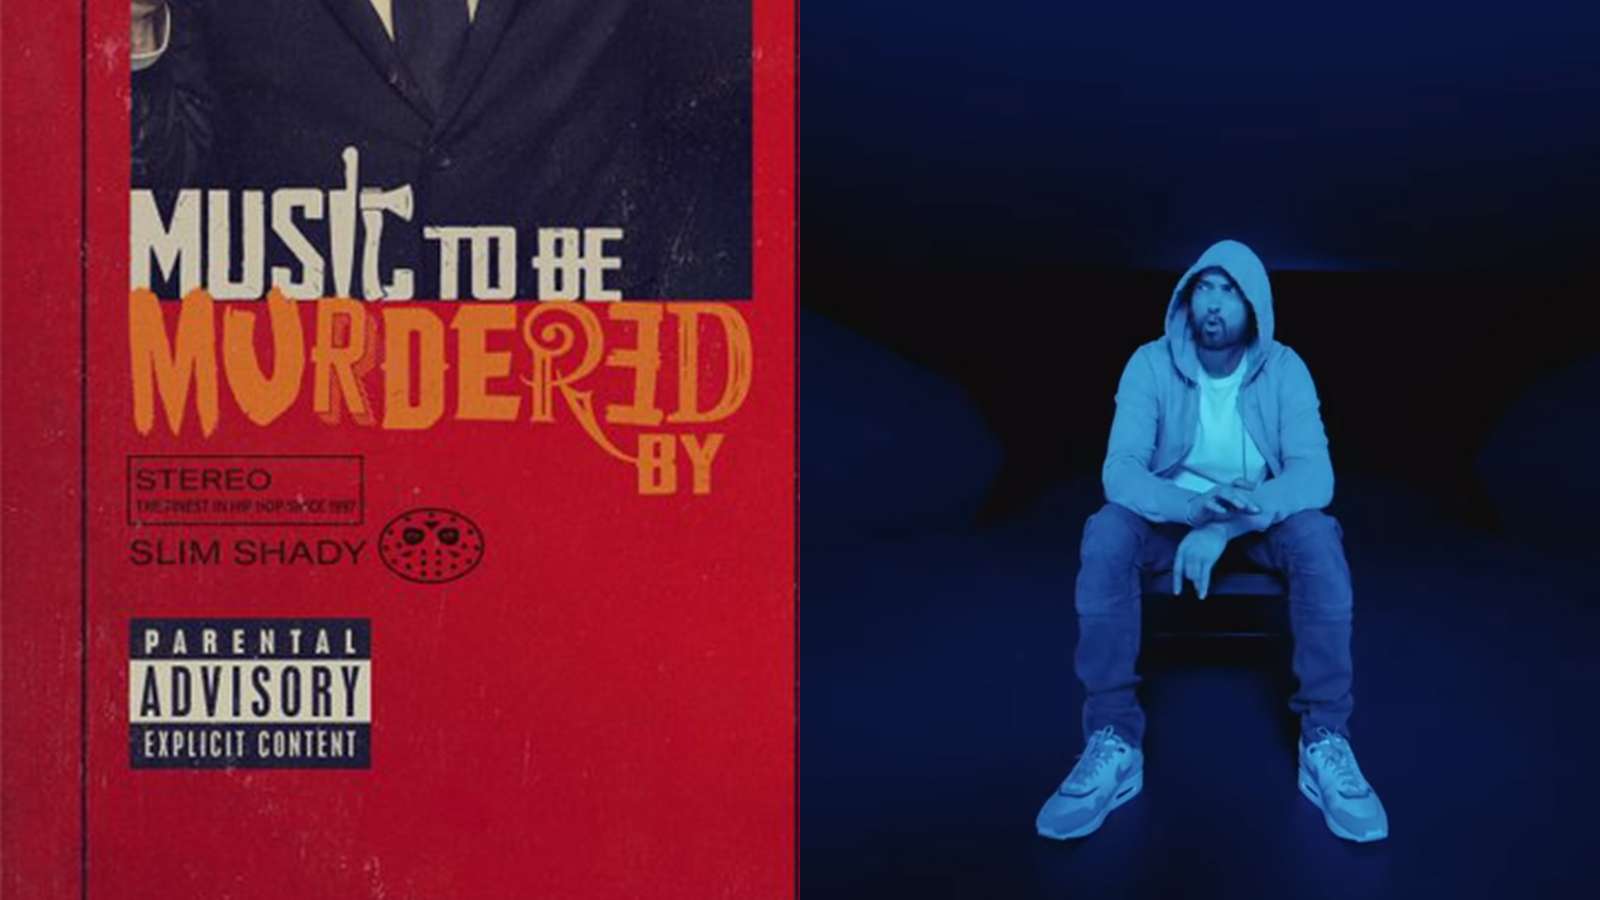 Eminem music to be murdered by album